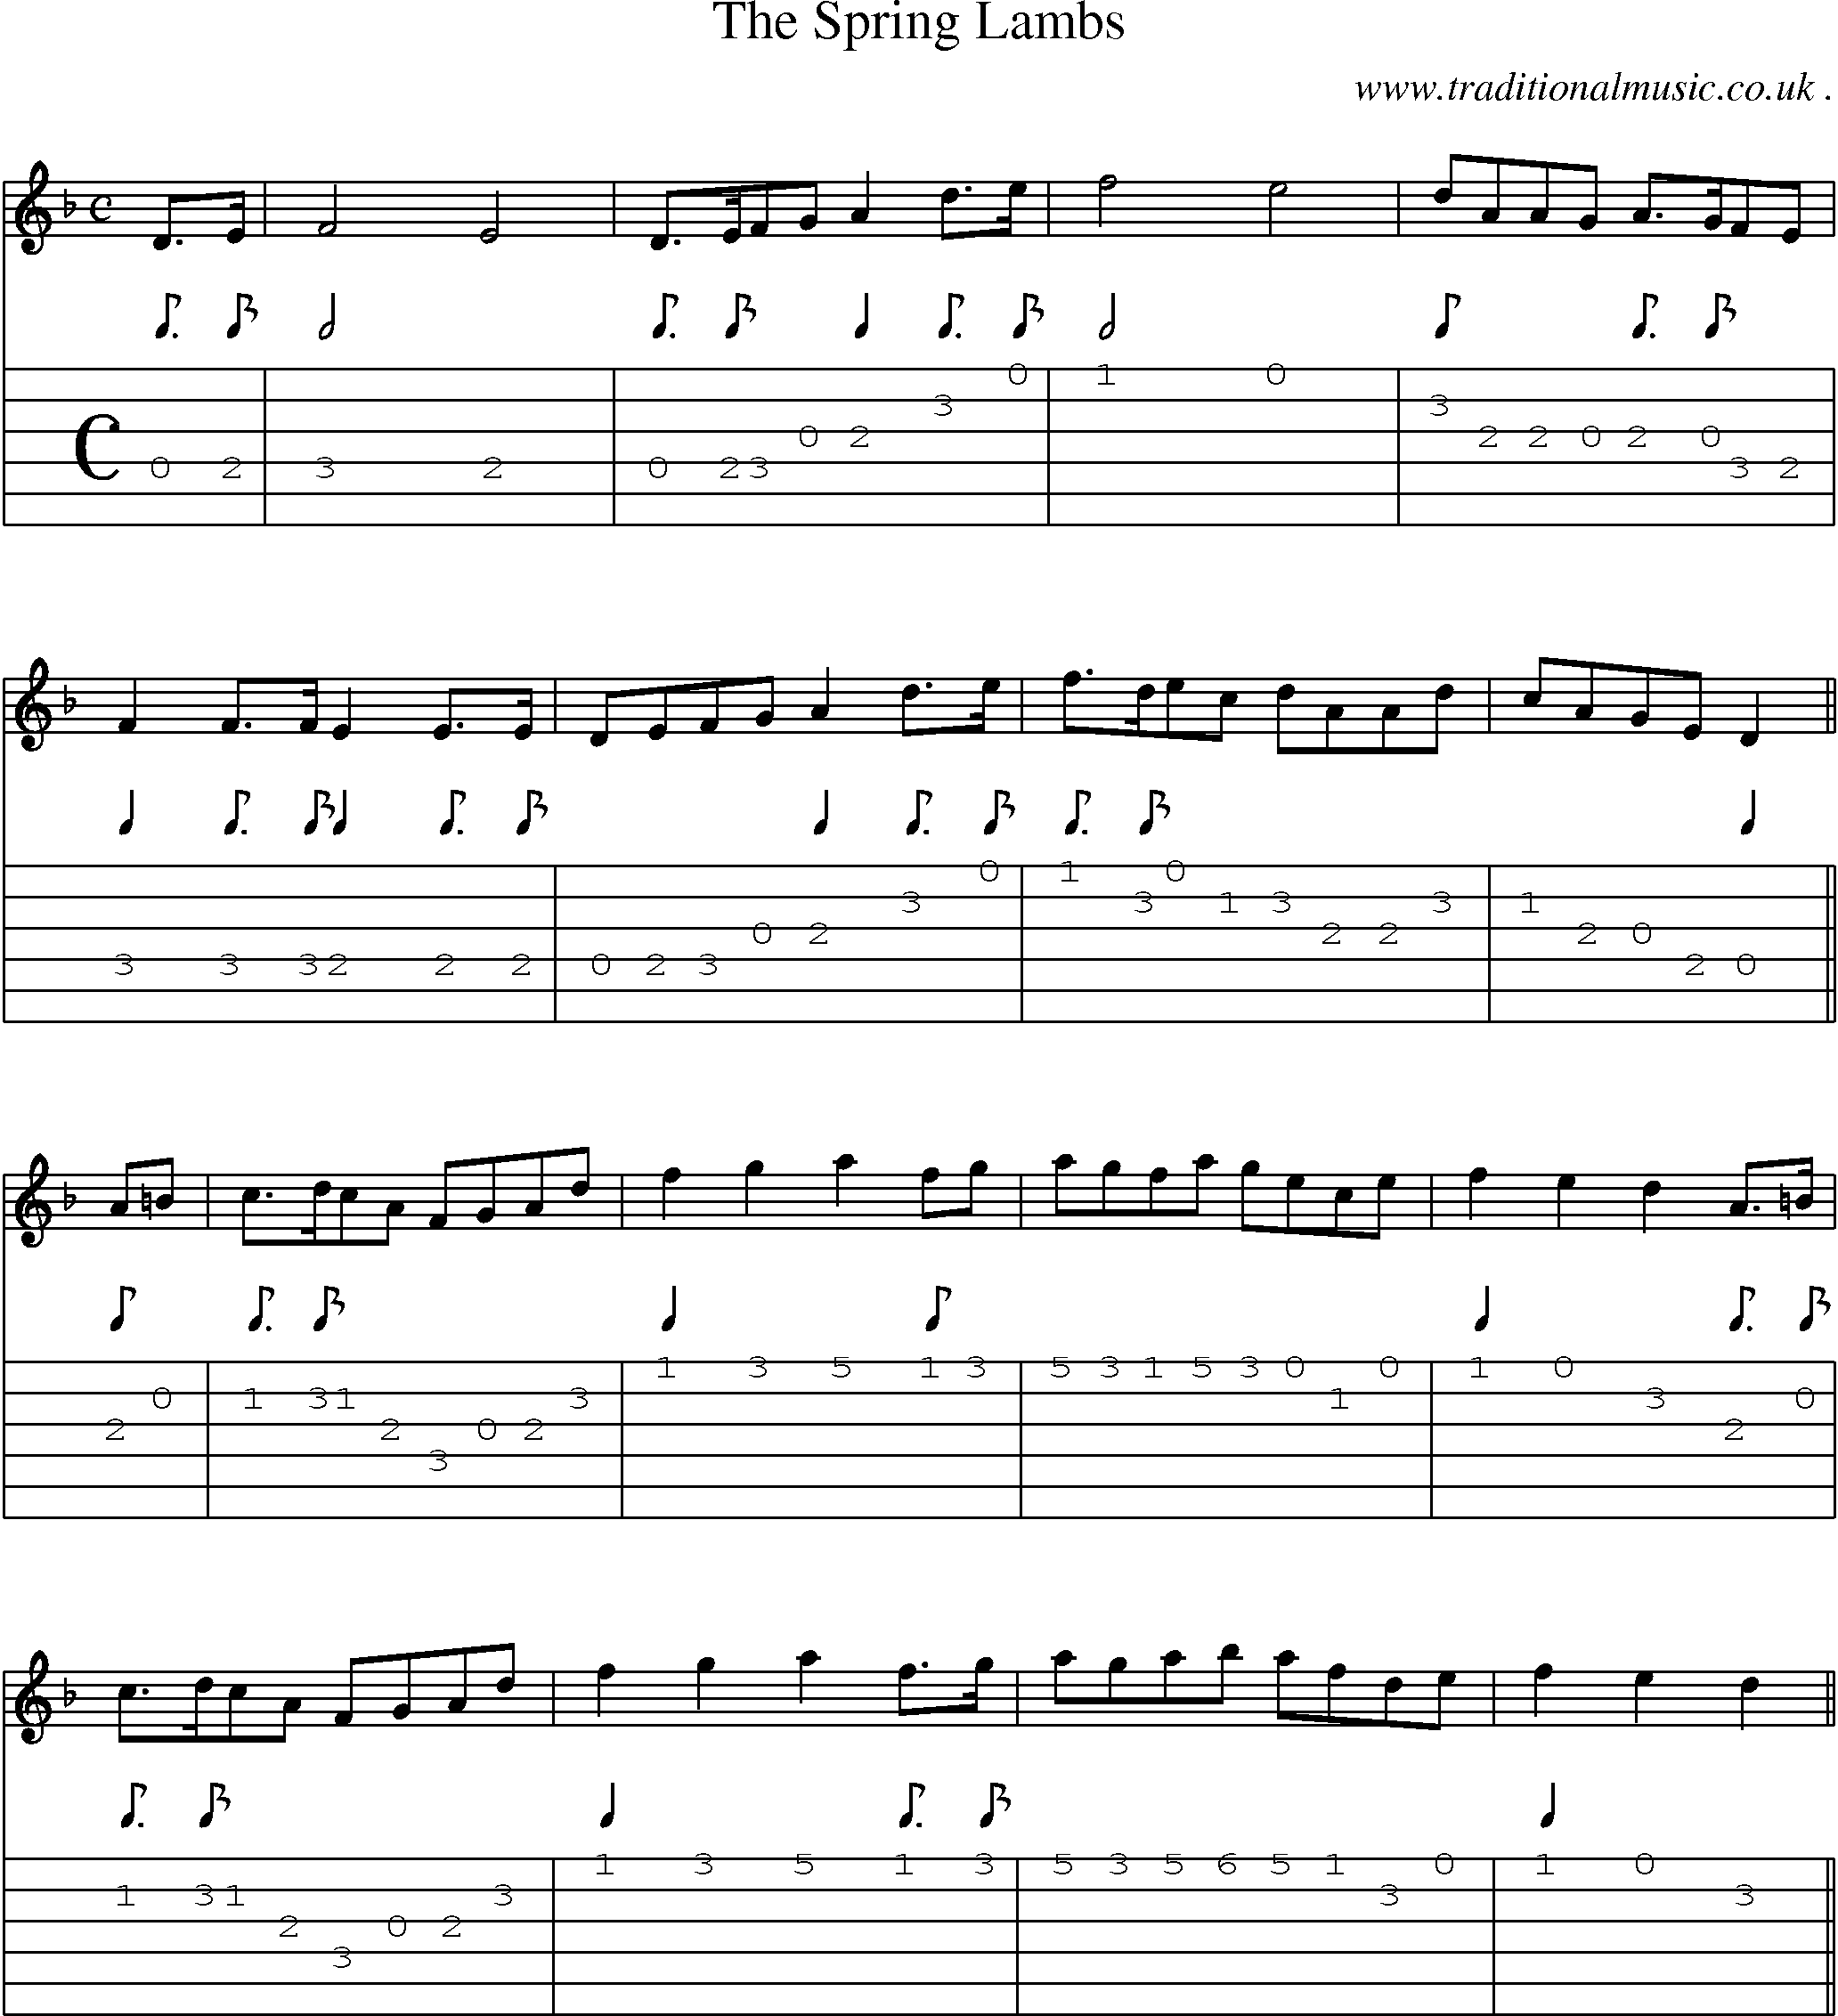 Sheet-Music and Guitar Tabs for The Spring Lambs